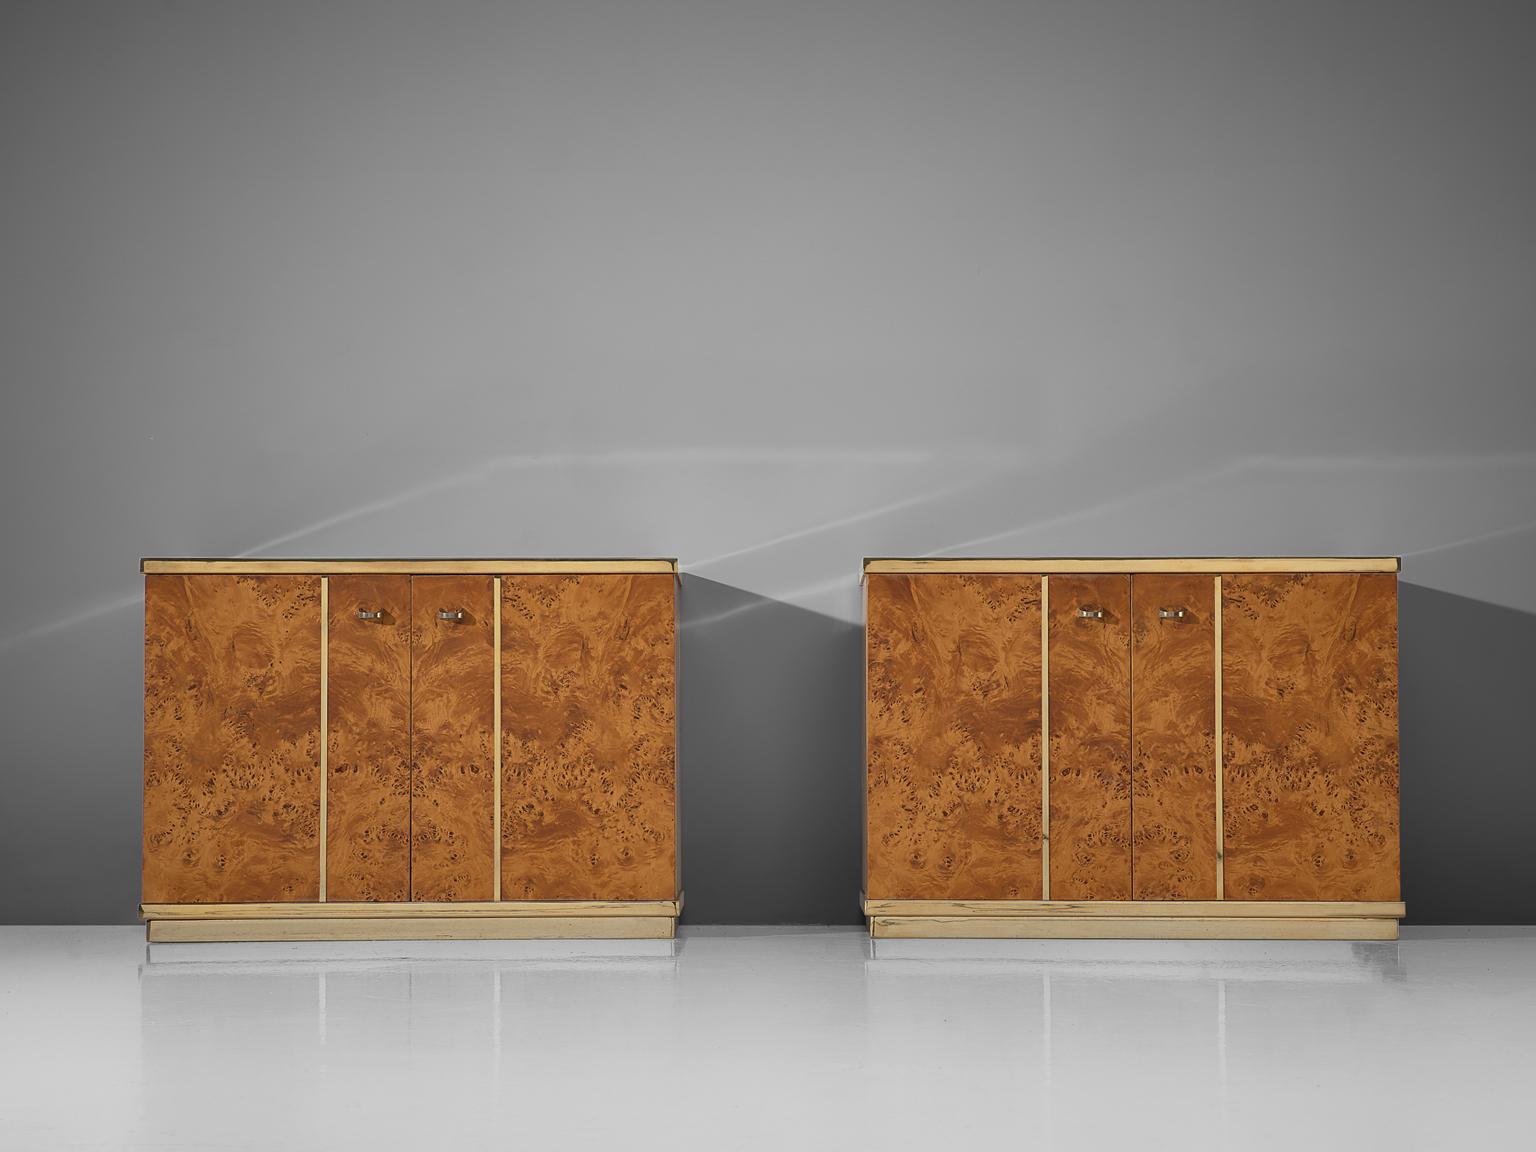 Pair of small sideboards, mappa burl wood and brass, Italy, circa 1960.

Luxurious small sideboards in the style of Jean Claude Mahey. The admirable mappa burl wood veneer gives these sideboards a nice and warm appearance in combination with the